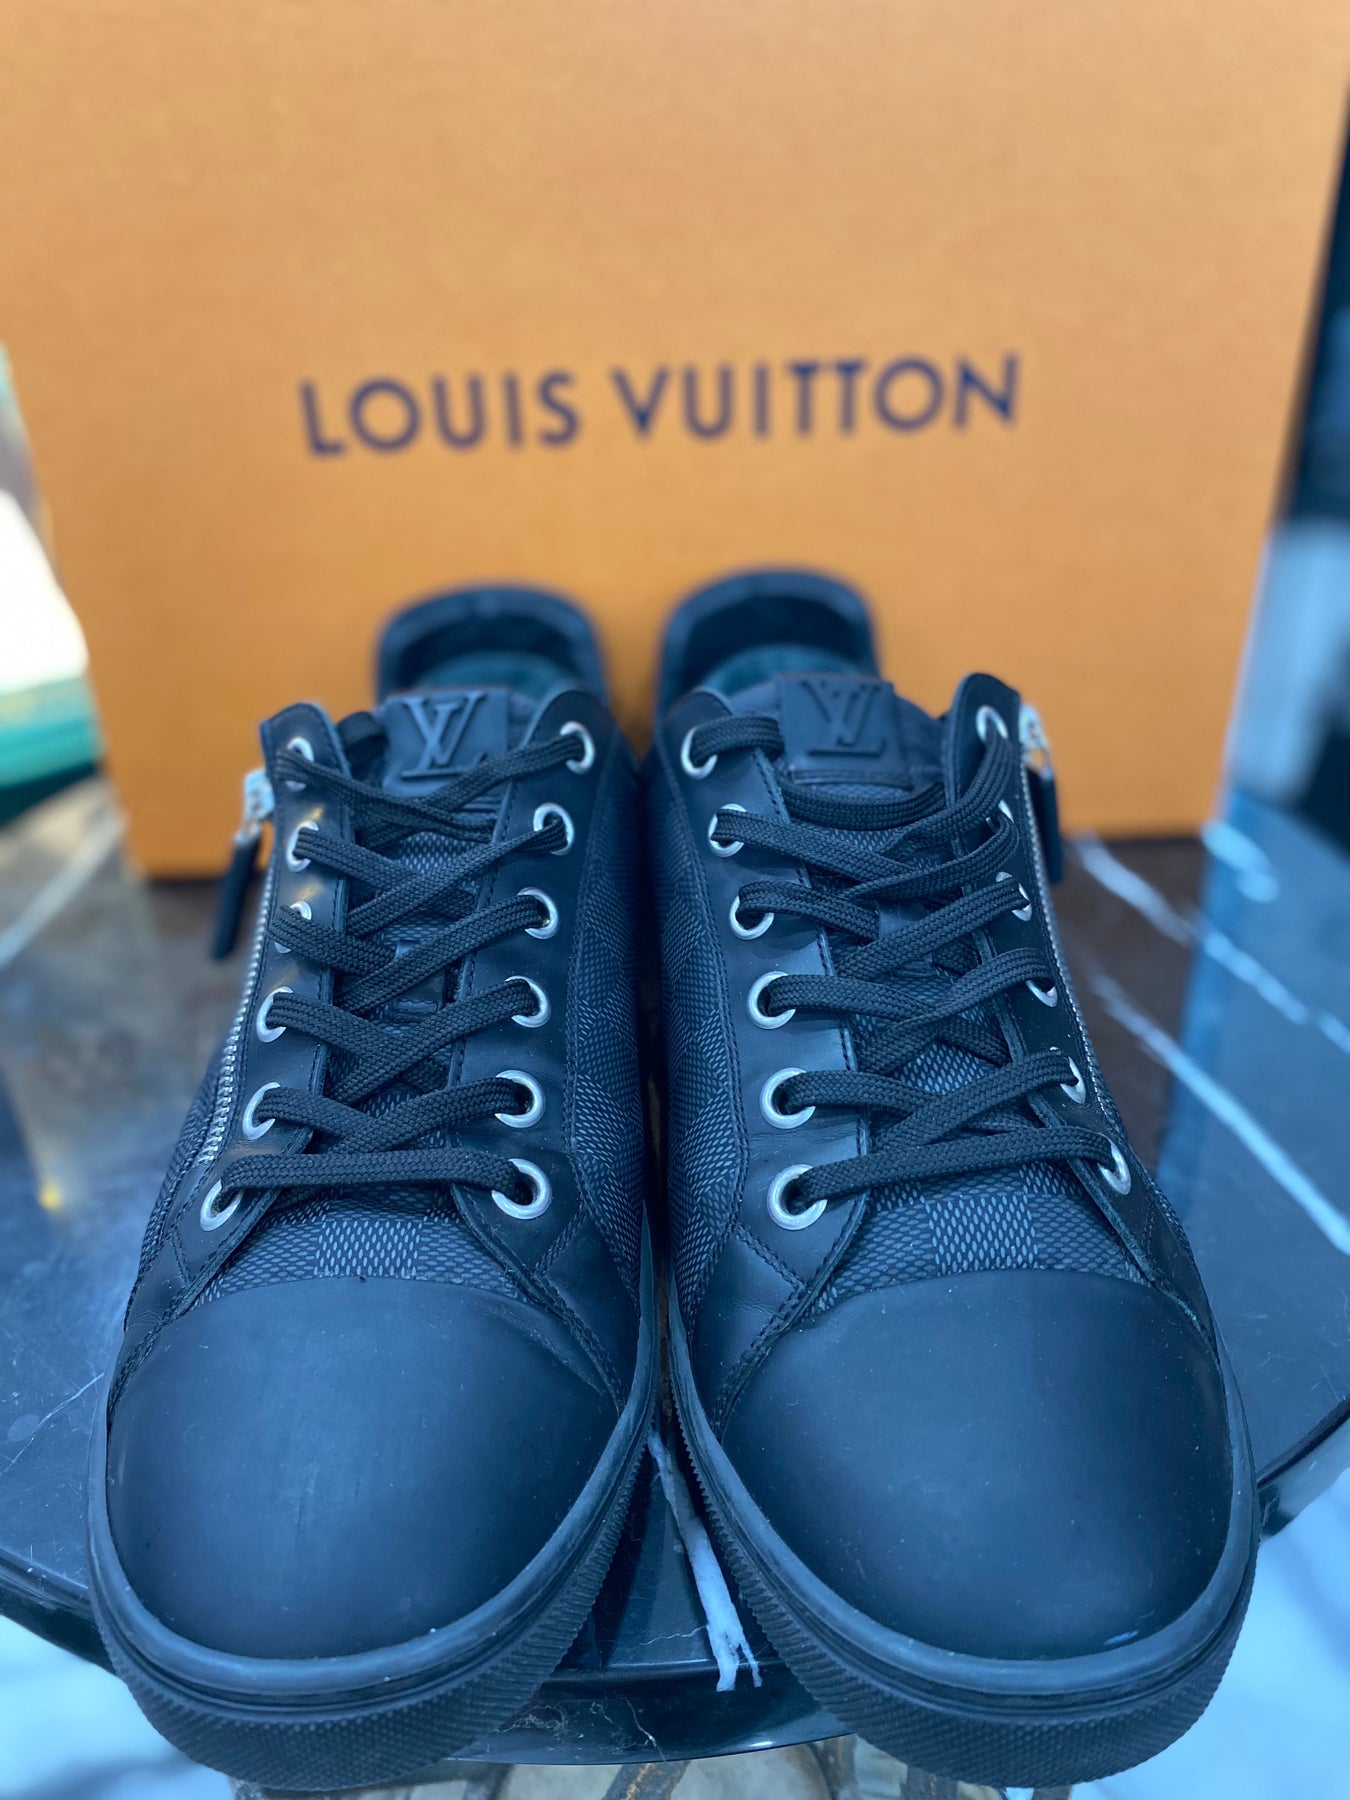 Louis Vuitton Damier Graphite Fabric and Suede Trim Zip Up High Top Sneakers  Size 41 Louis Vuitton